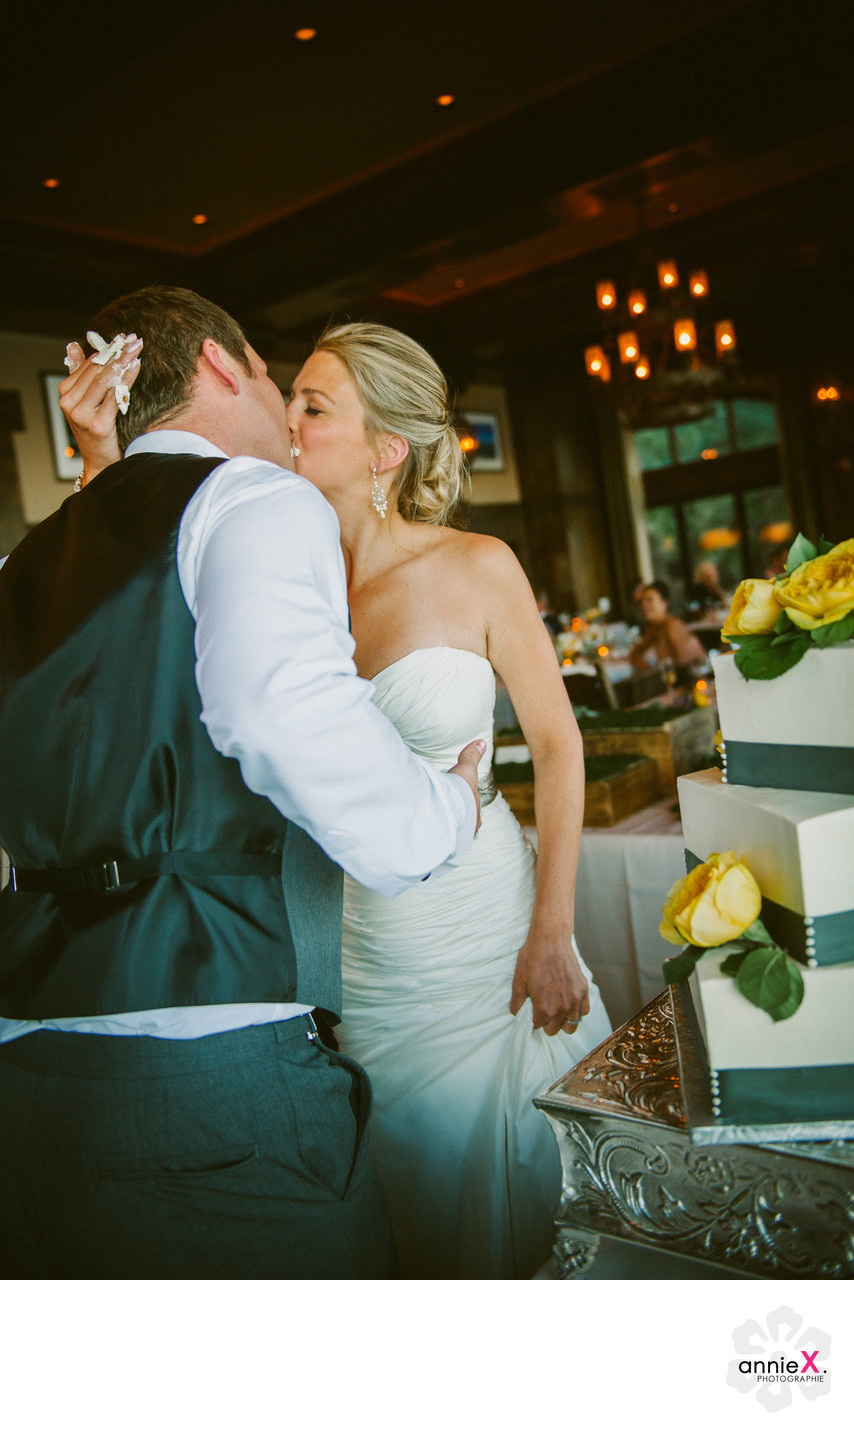 Cutting cake and kissing at West Shore cafe